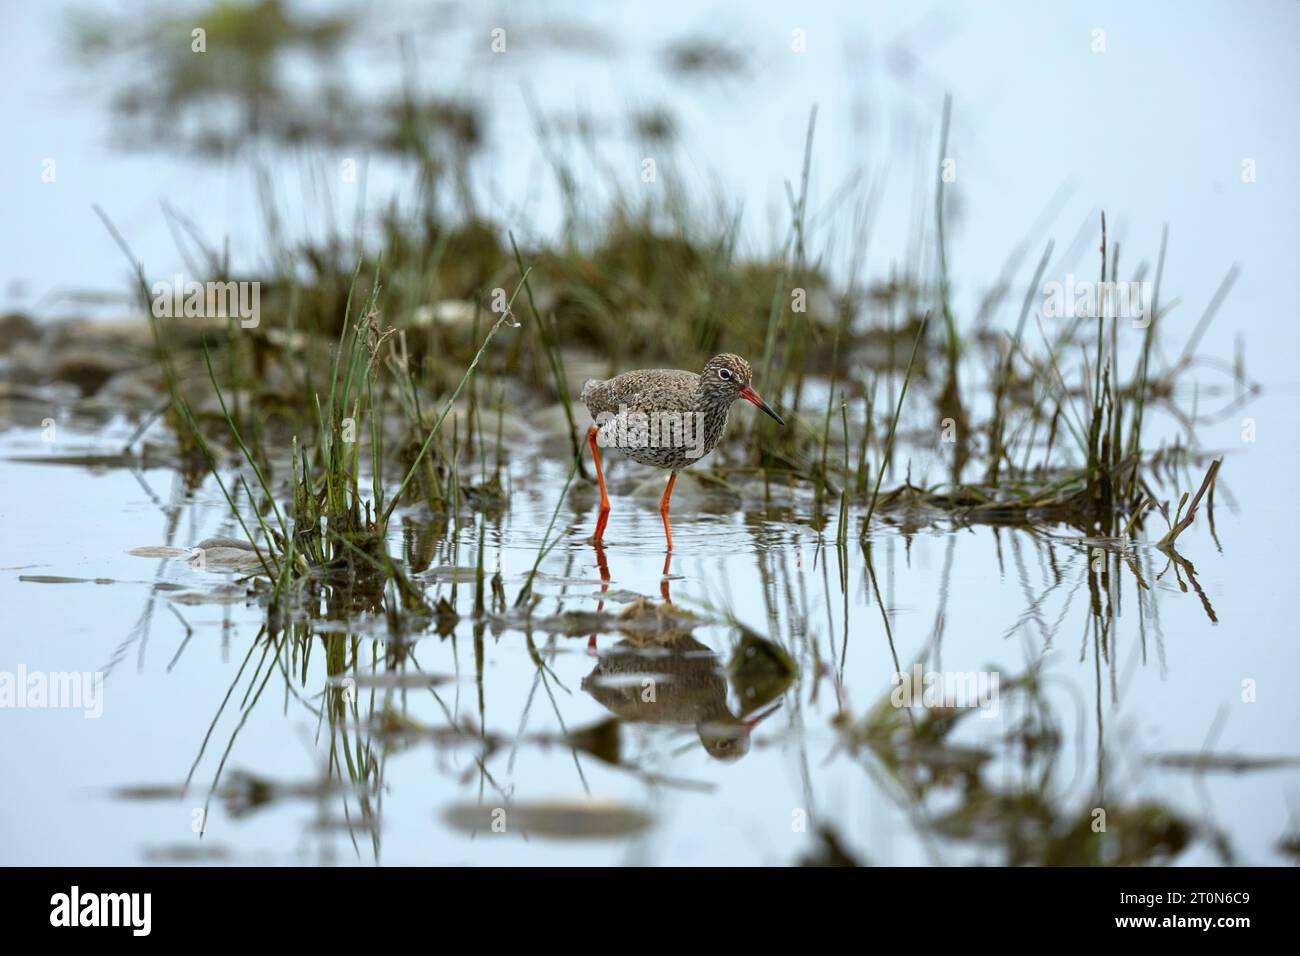 Redshank at a bathing pool Stock Photo